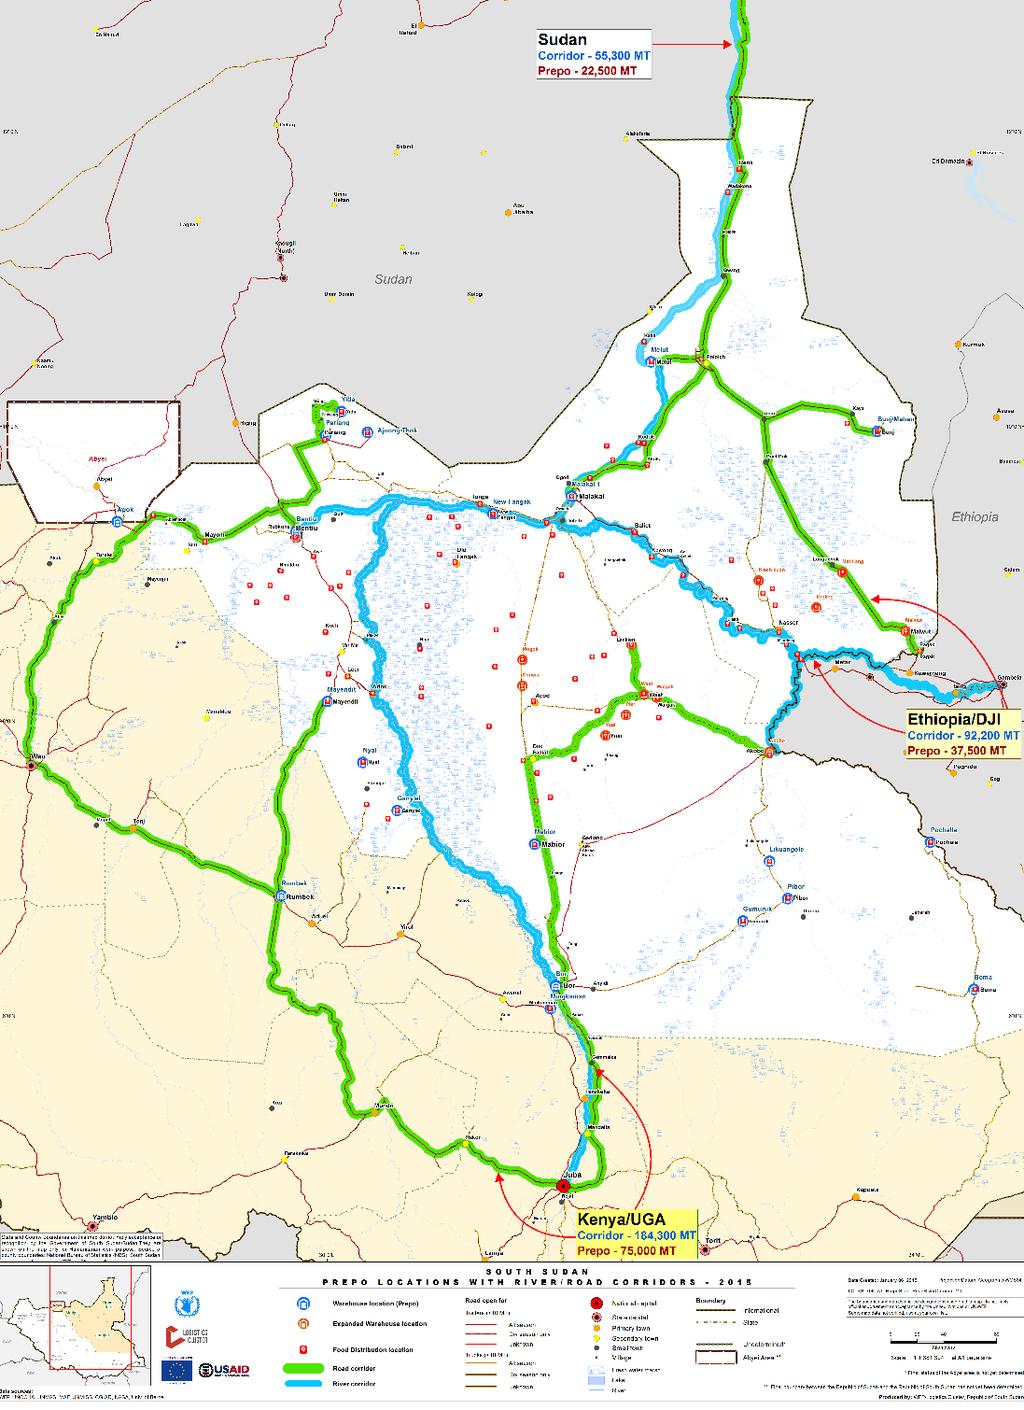 Sudan Corridor -50,466 Prepo - 16,000 2015 Prepo Plan Number of preposition locations 21 Number of expanded warehouses 12 ETH/DJI Corridor - 84,111 Prepo - 26,800 Corridor